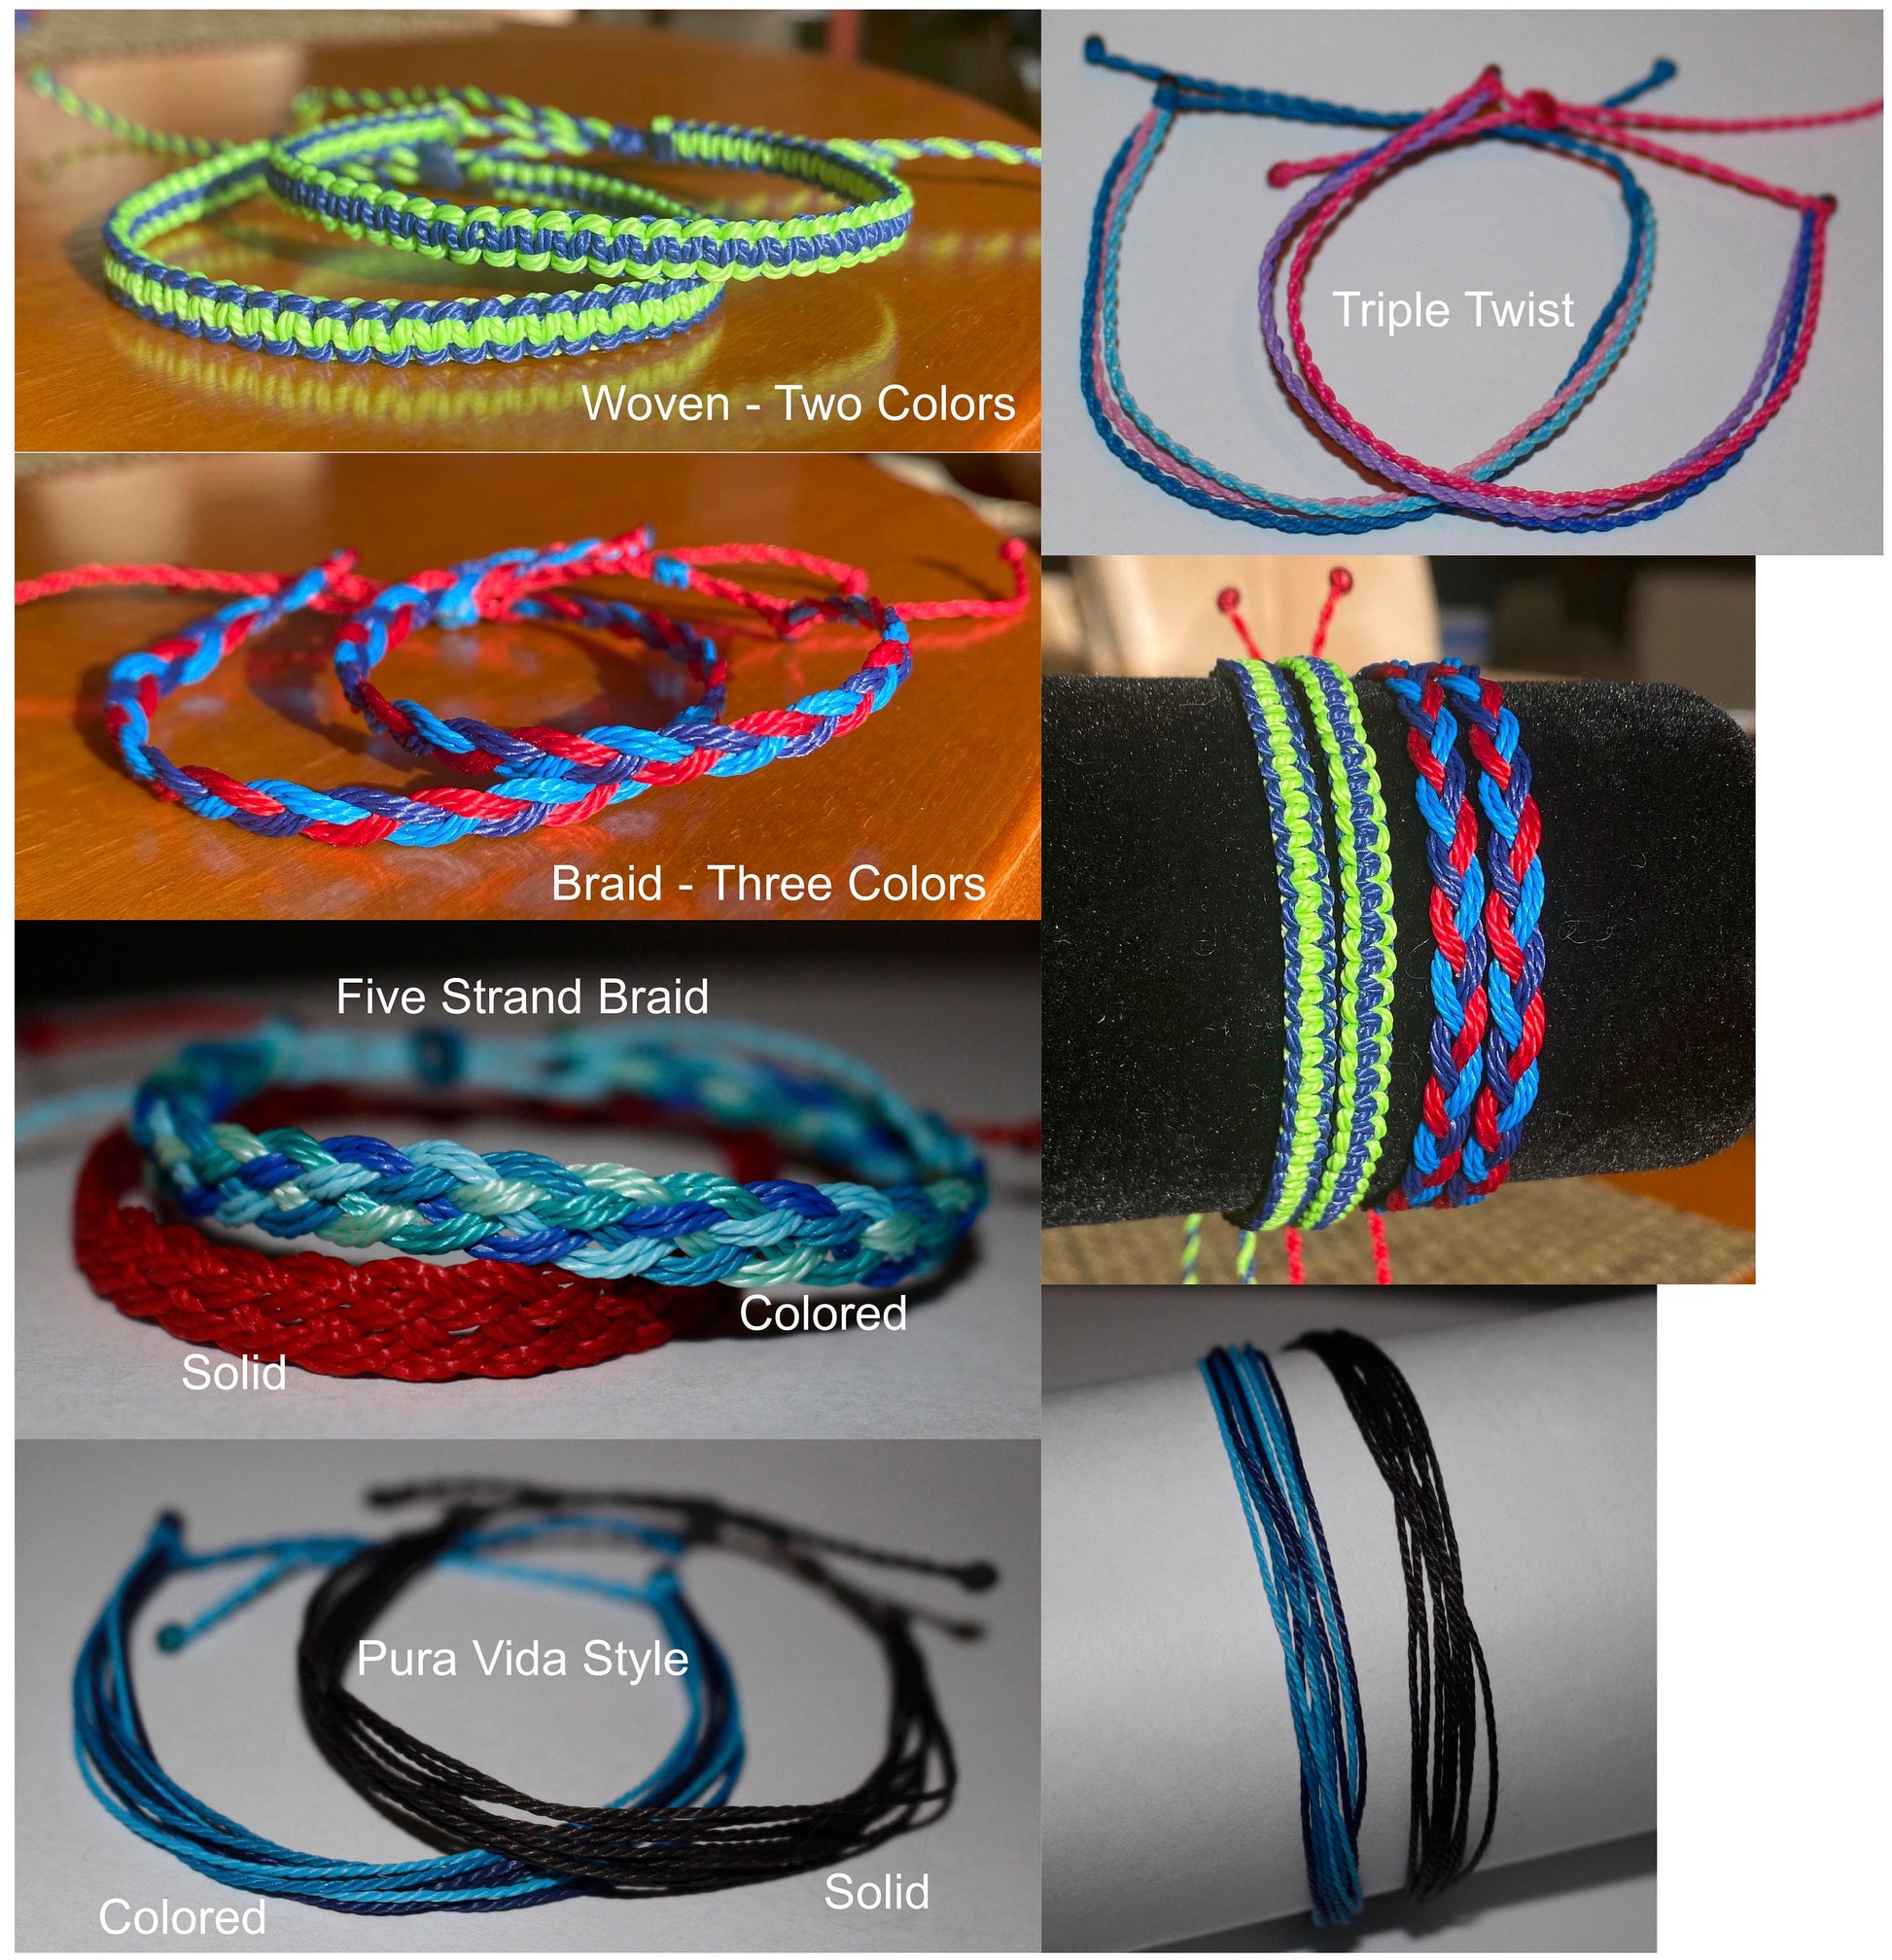 Everlyne Red Cord Friendship Bracelet in Red Illusion